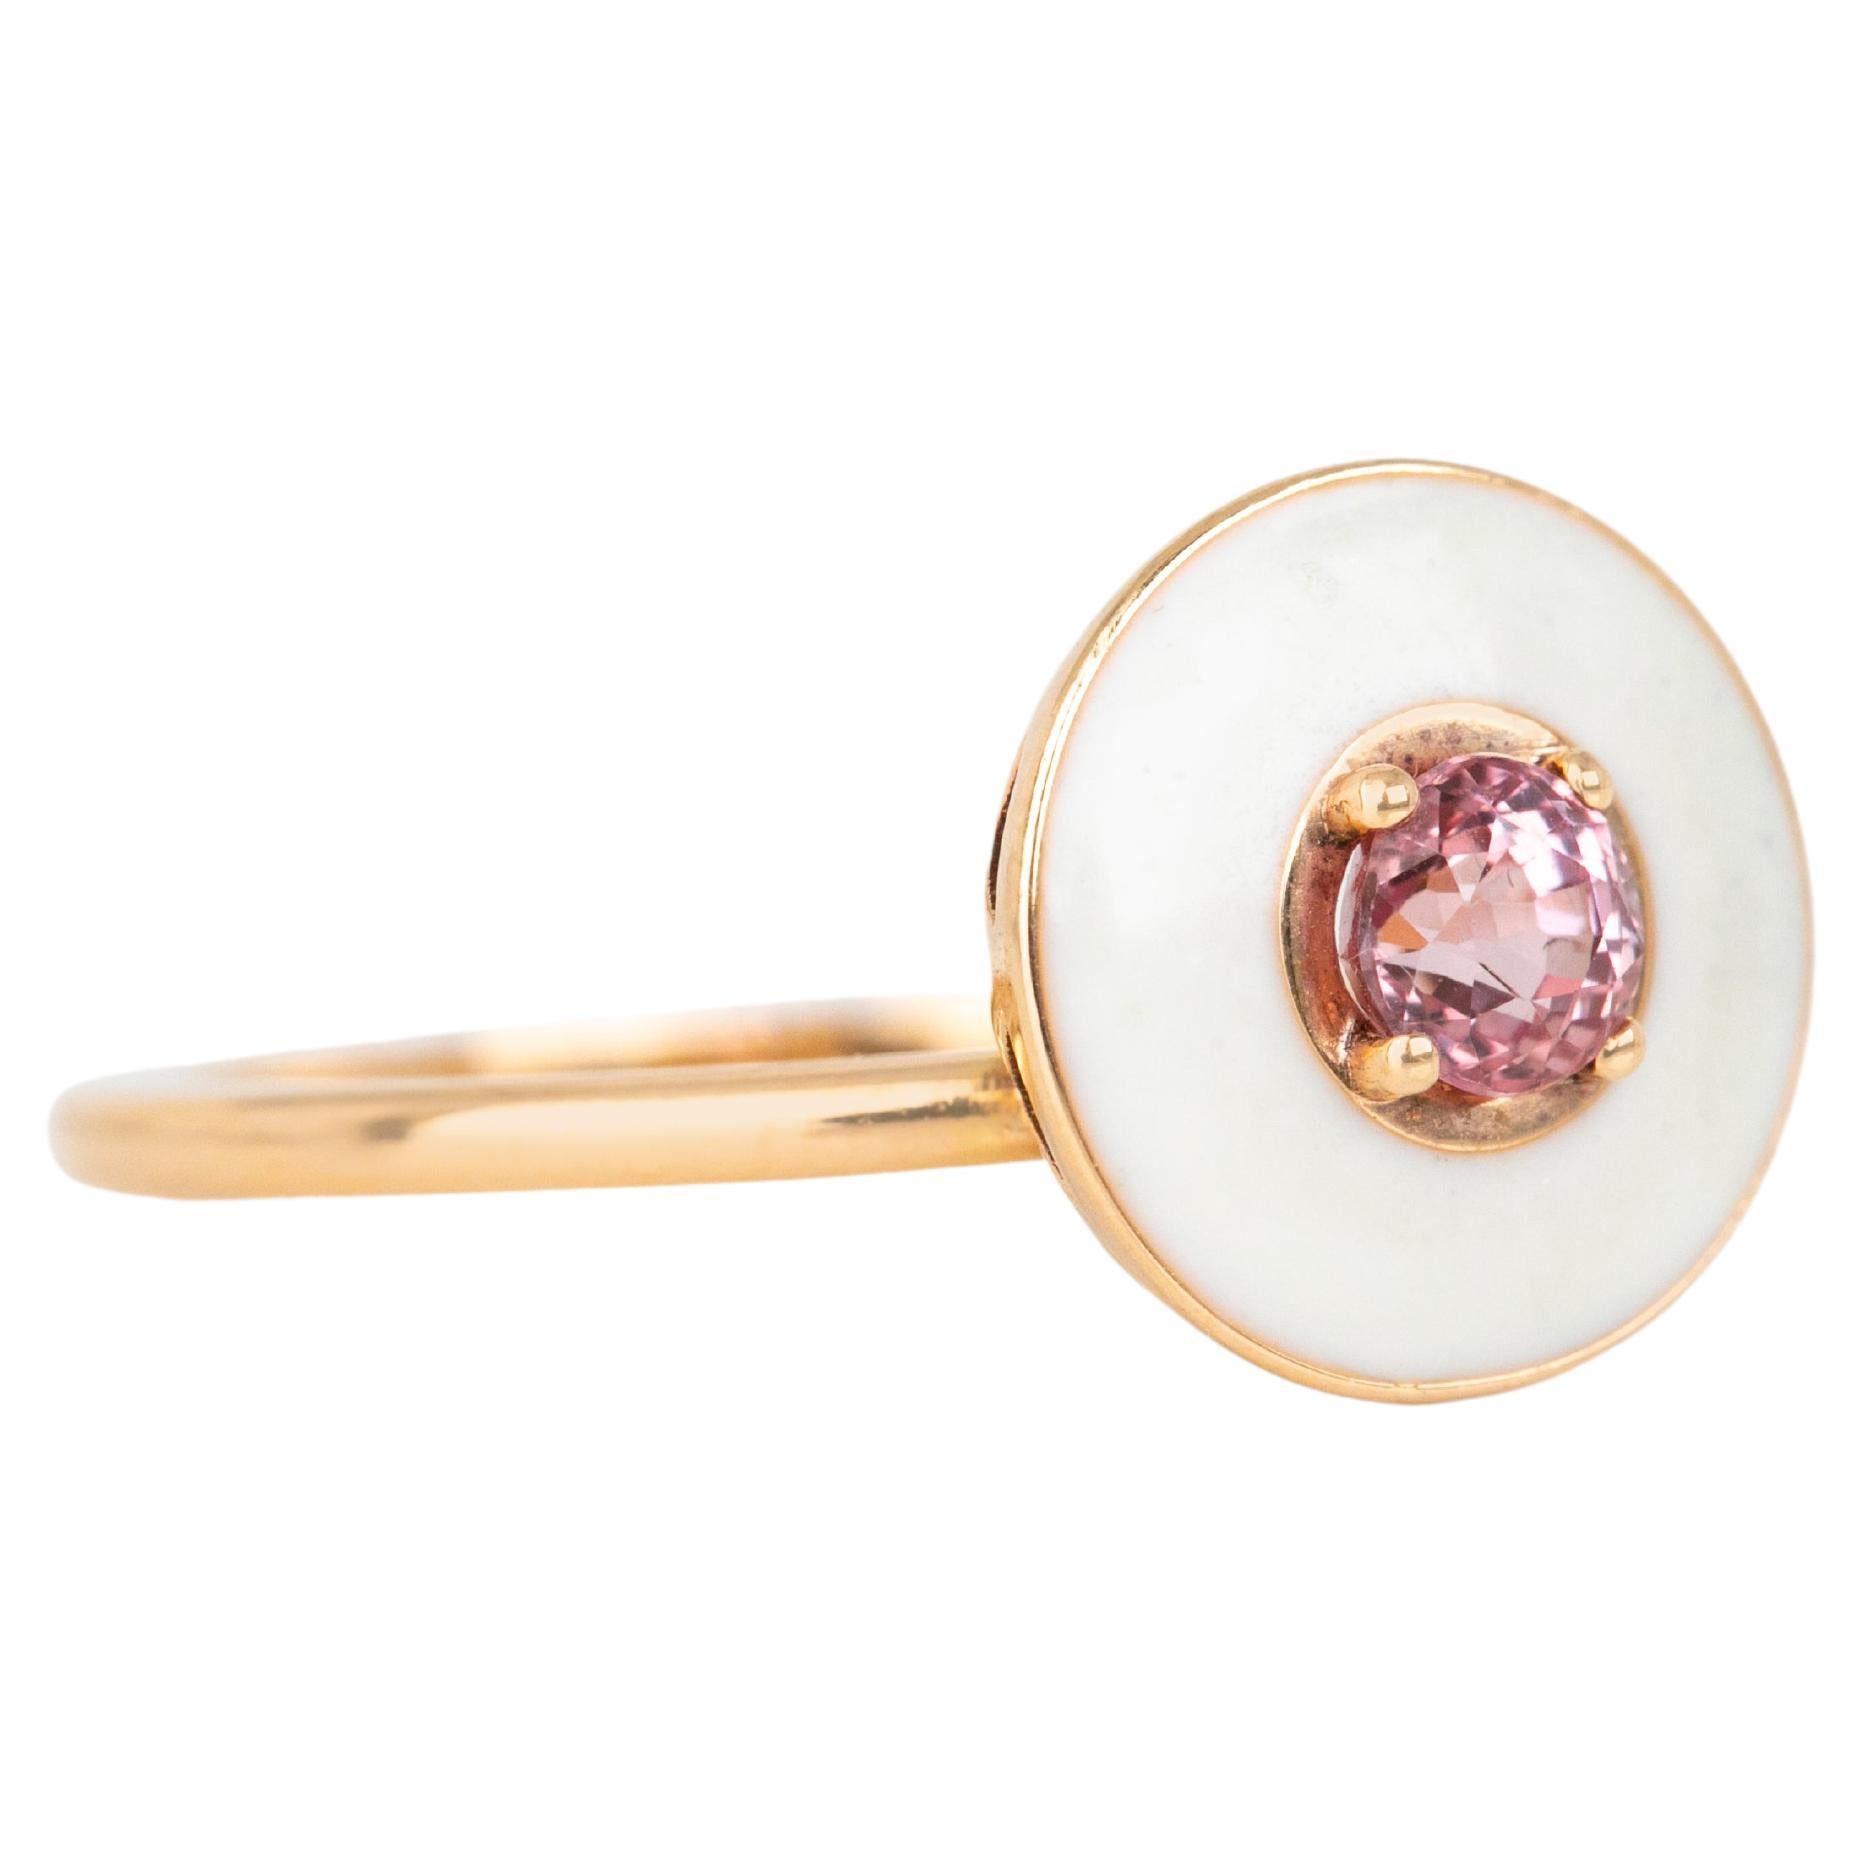 For Sale:  14k Gold Art Deco Stlye Enameled 0.30 Ct Pink Sapphire Cocktail Ring 2